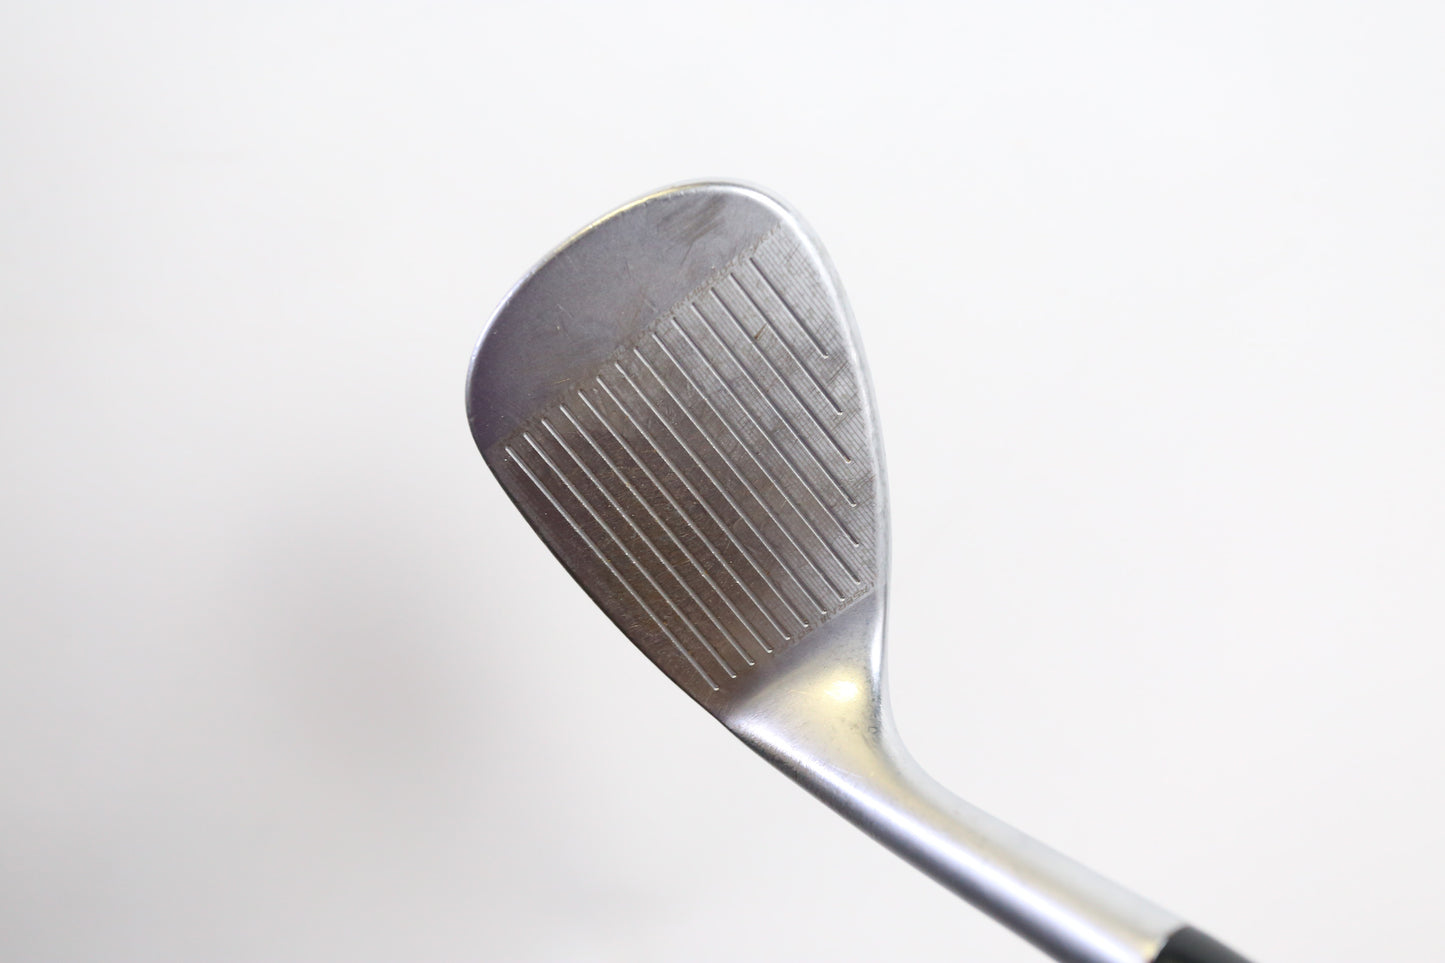 Used Cleveland 588 Tour Action Lob Wedge - Right-Handed - 58 Degrees - Stiff Flex